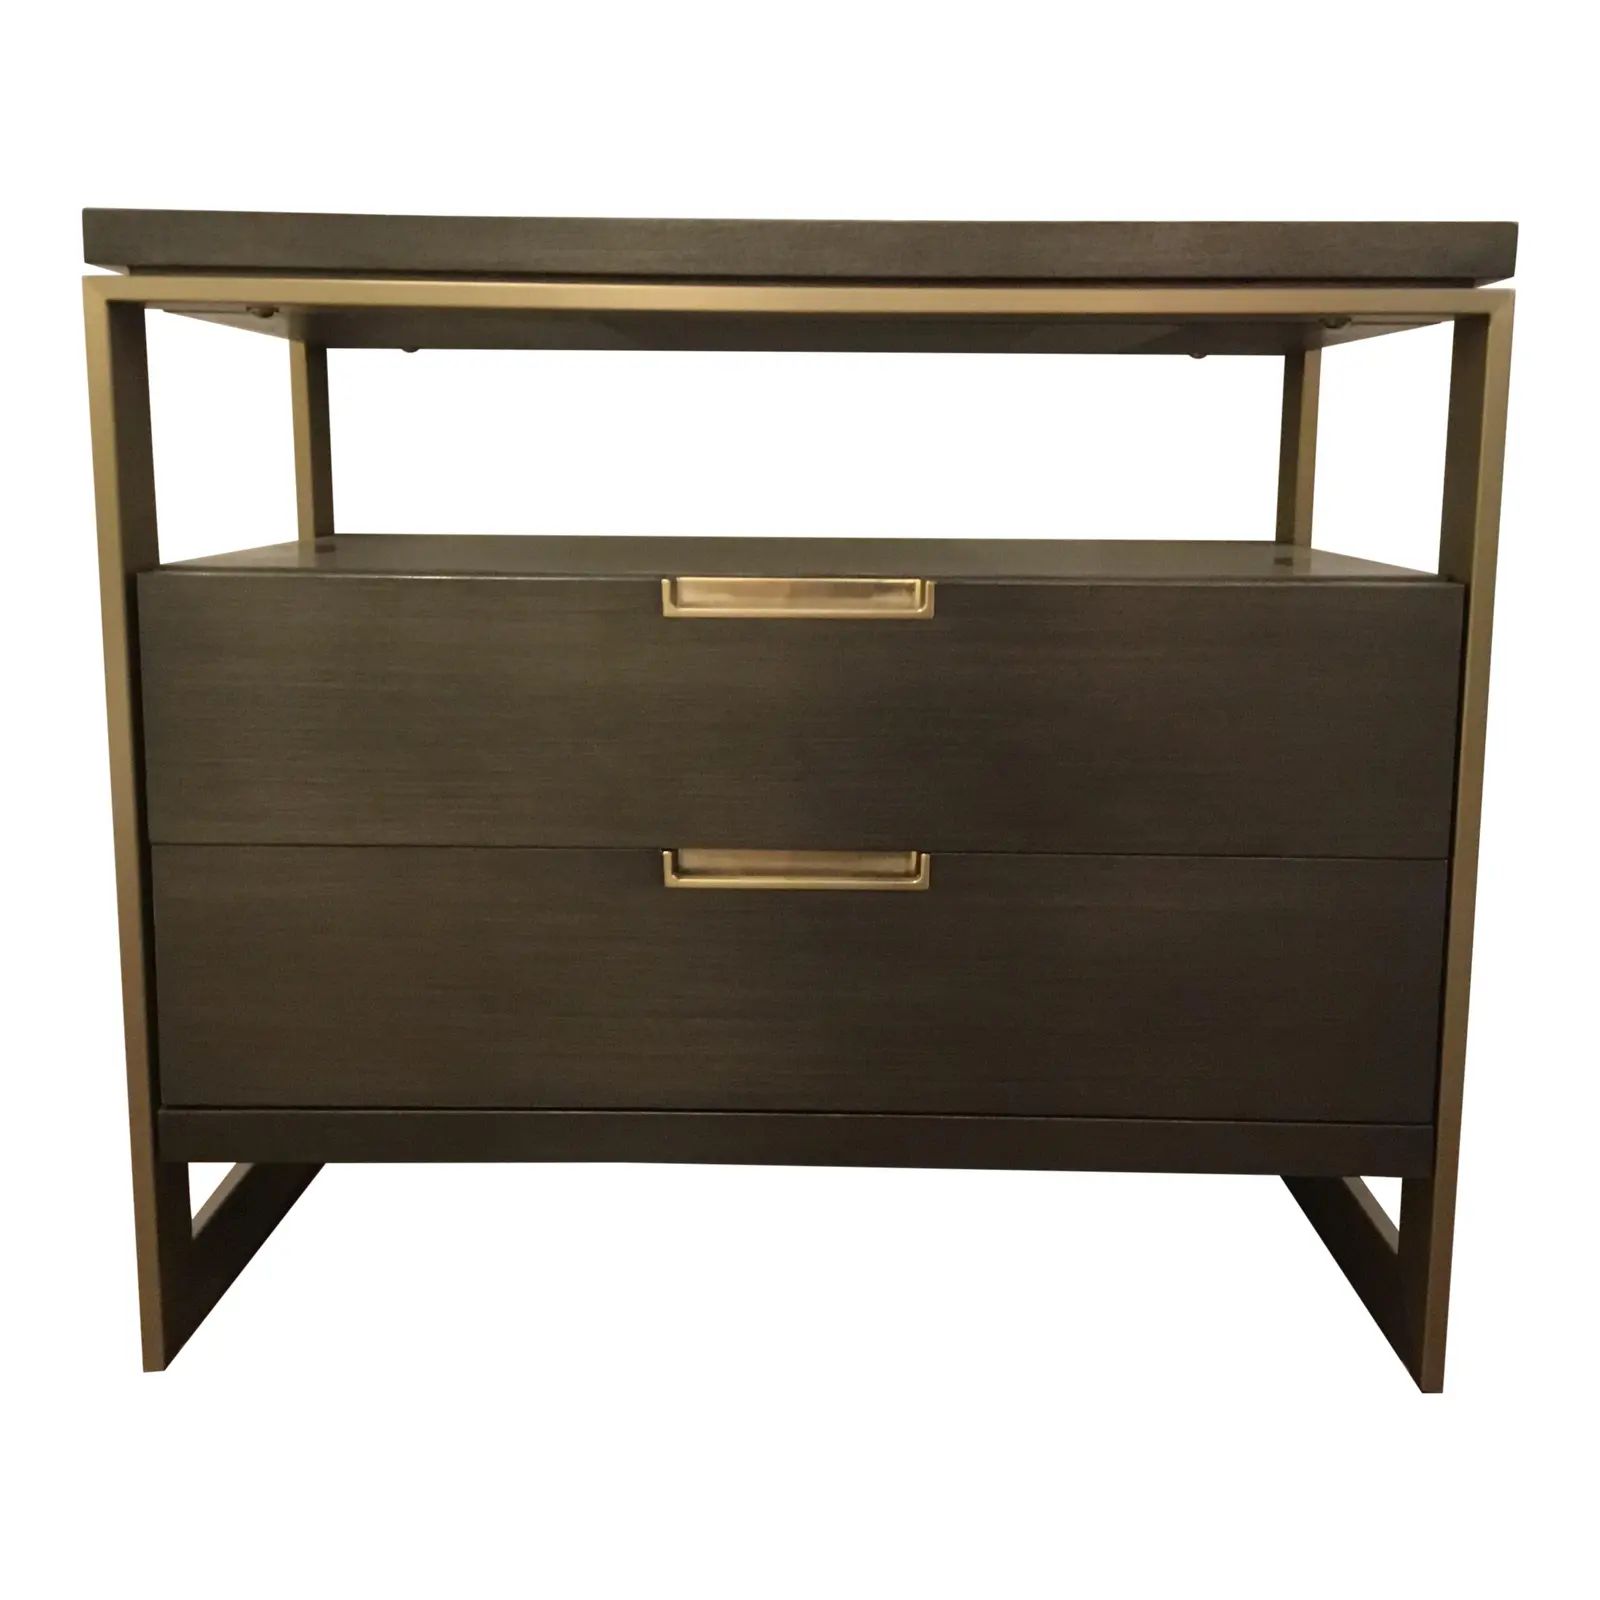 Belle Meade Signature Modern Espresso and Brass Finished Hawkins Nightstand | Chairish